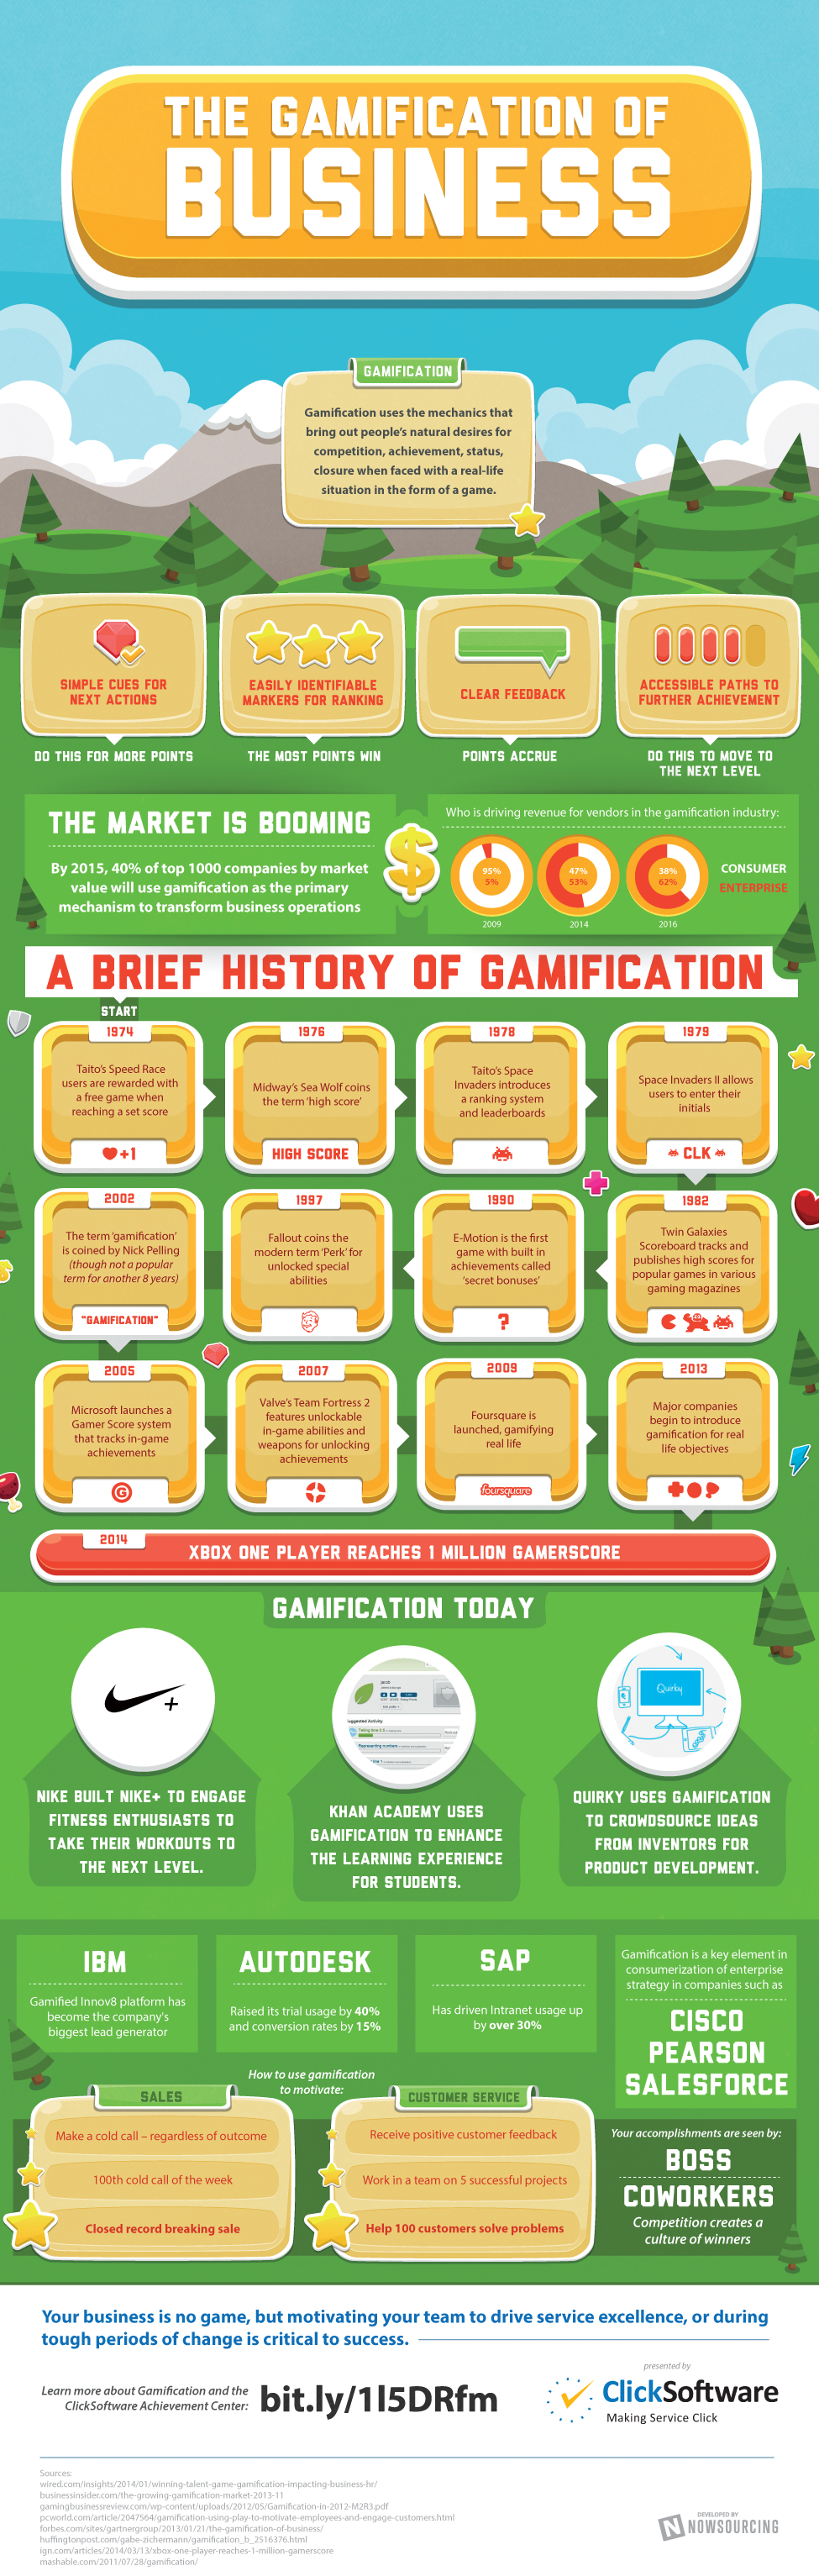 Gamification-of-Business_28121